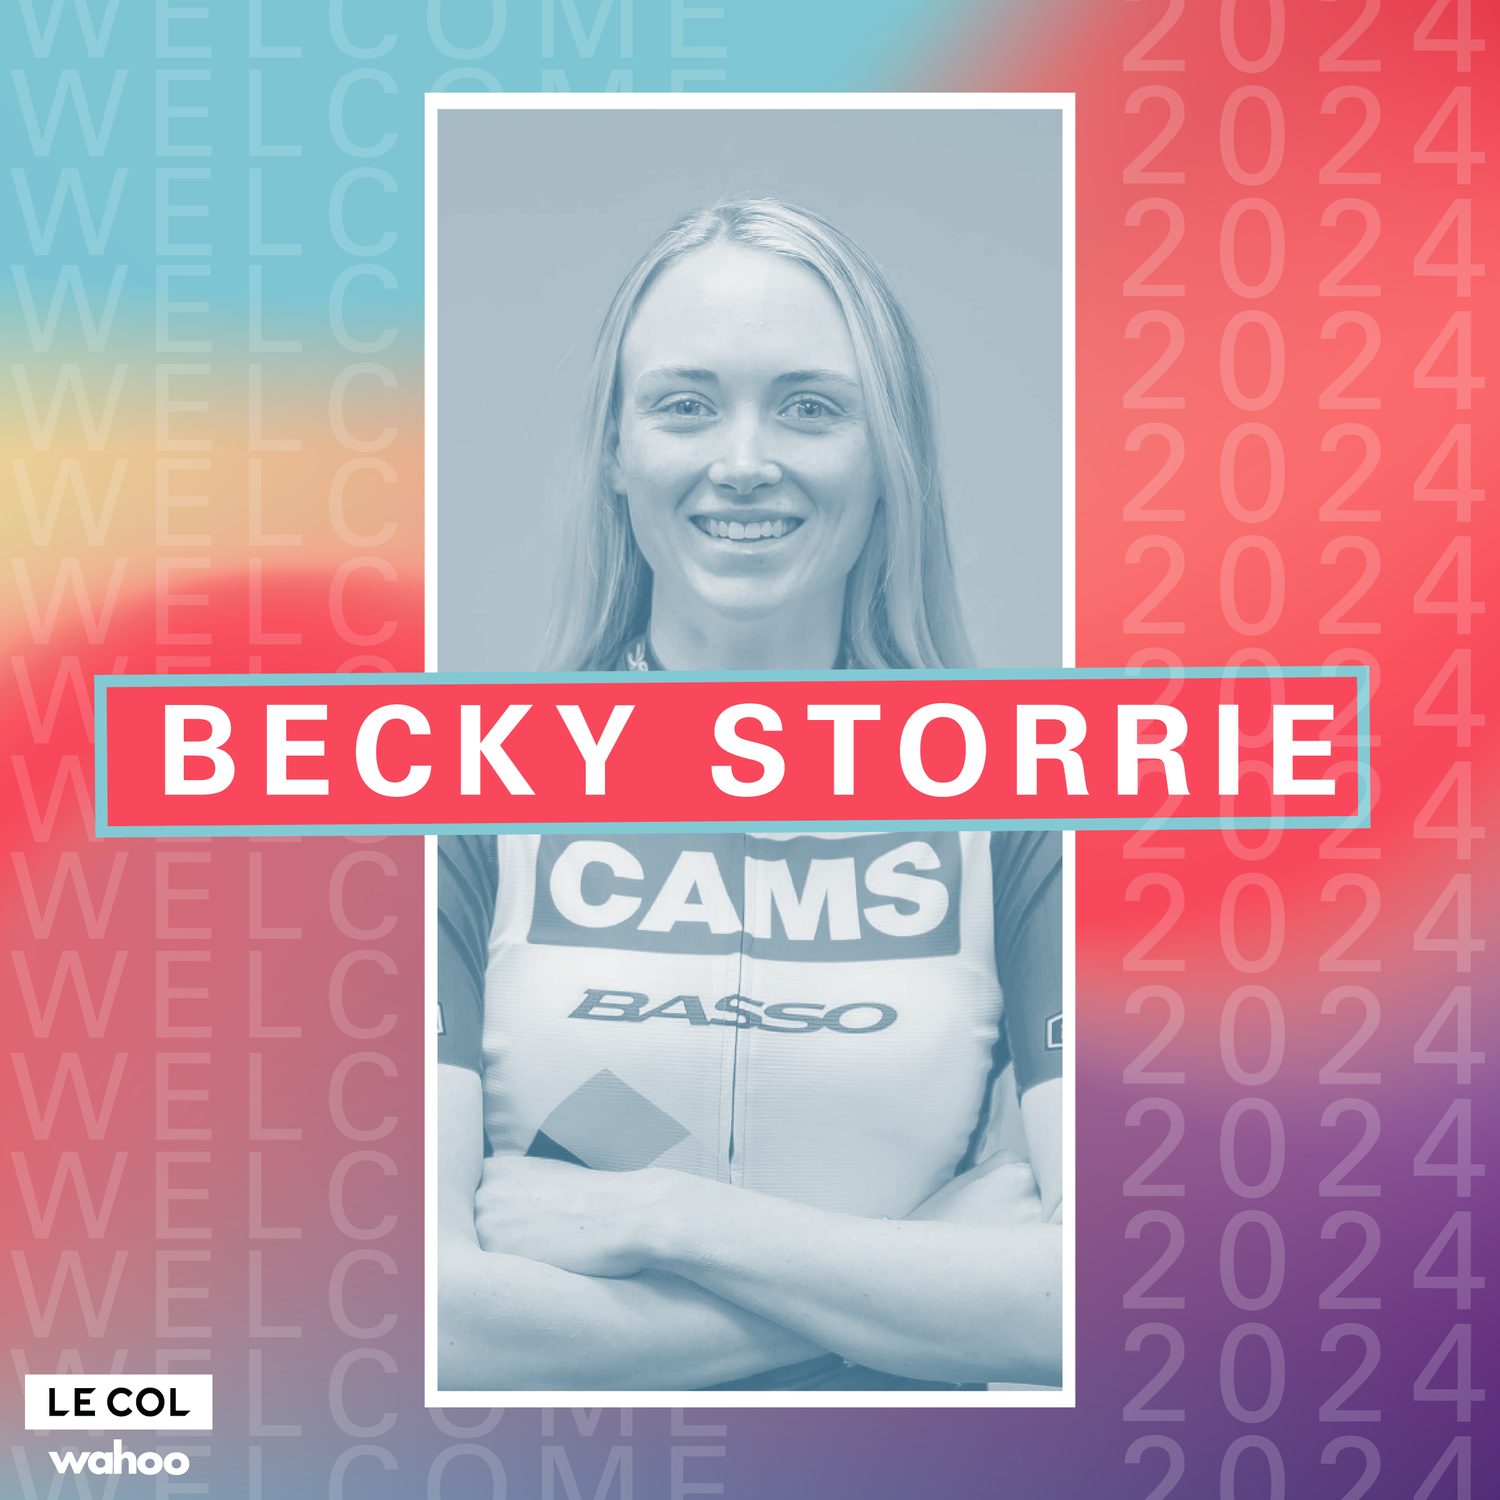 Team adds climbing power to 2023 roster with Becky Storrie